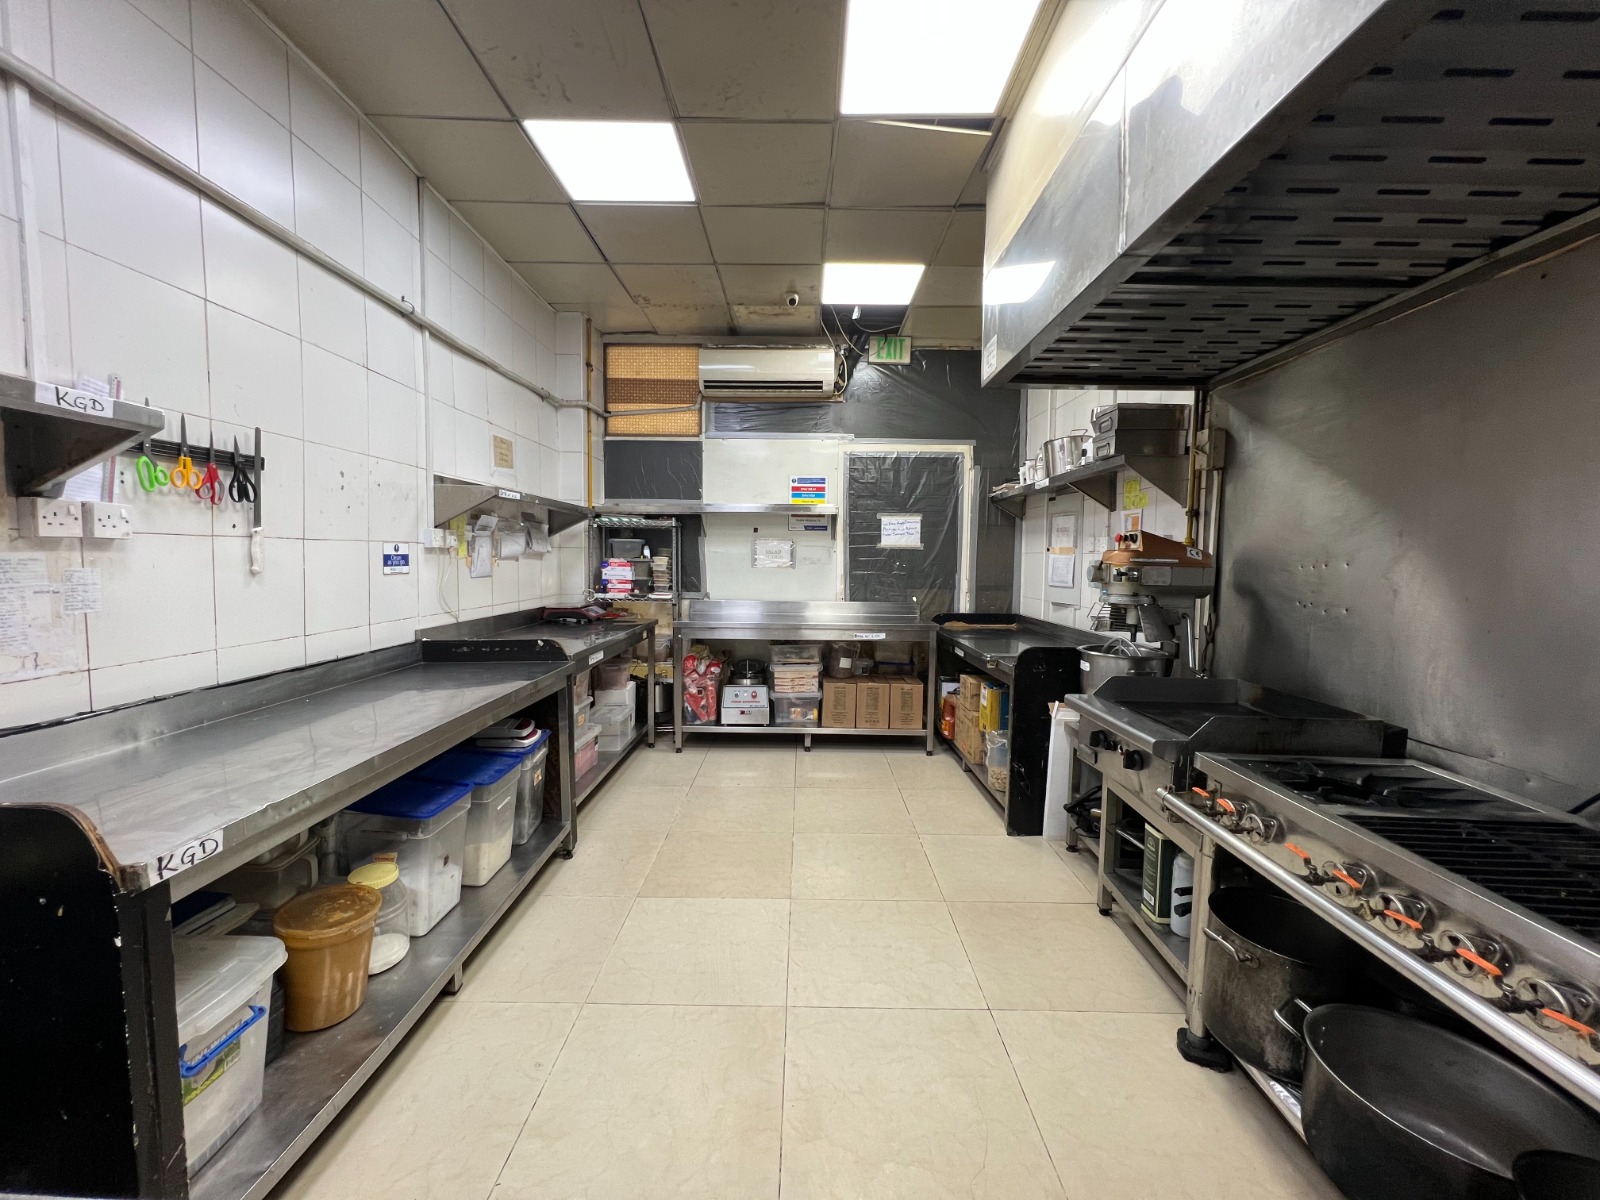 Retail | Fitted | Ready to Move In Kitchen / Restaurant